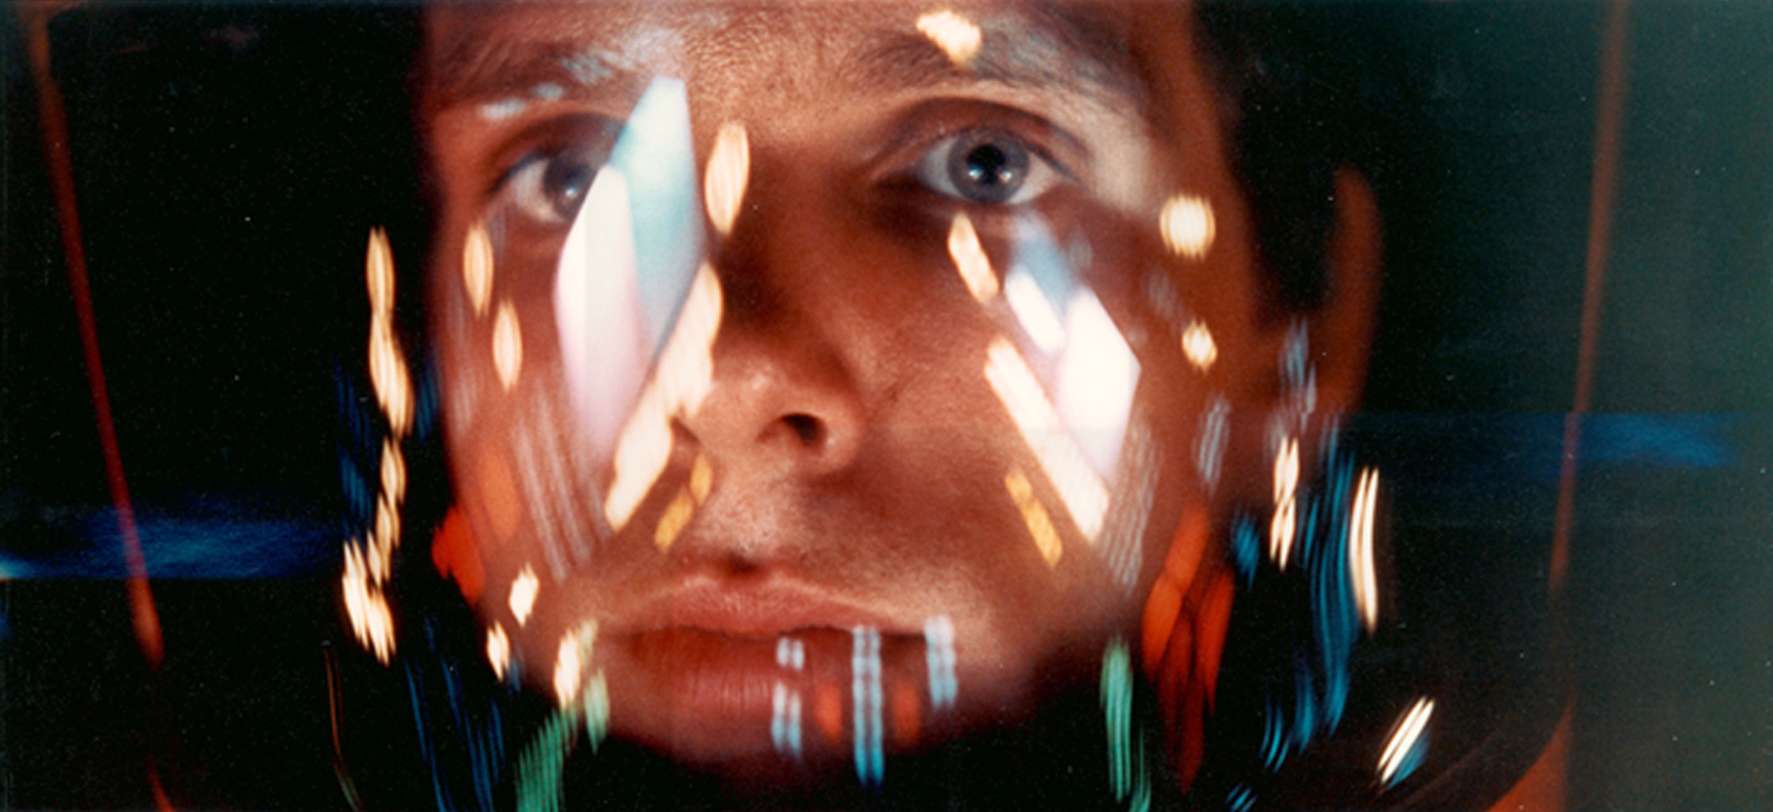 The Los Angeles County Museum of Art (LACMA) and the Academy of Motion Picture Arts and Sciences (The Academy) are pleased to co-present the first U.S. retrospective of filmmaker Stanley Kubrick, developed in collaboration with the Kubrick Estate and the Deutsches Filmmuseum, Frankfurt.

Pictured: The astronaut Bowman (Keir Dullea) in the memory space of the computer HAL, 2001: A SPACE ODYSSEY.